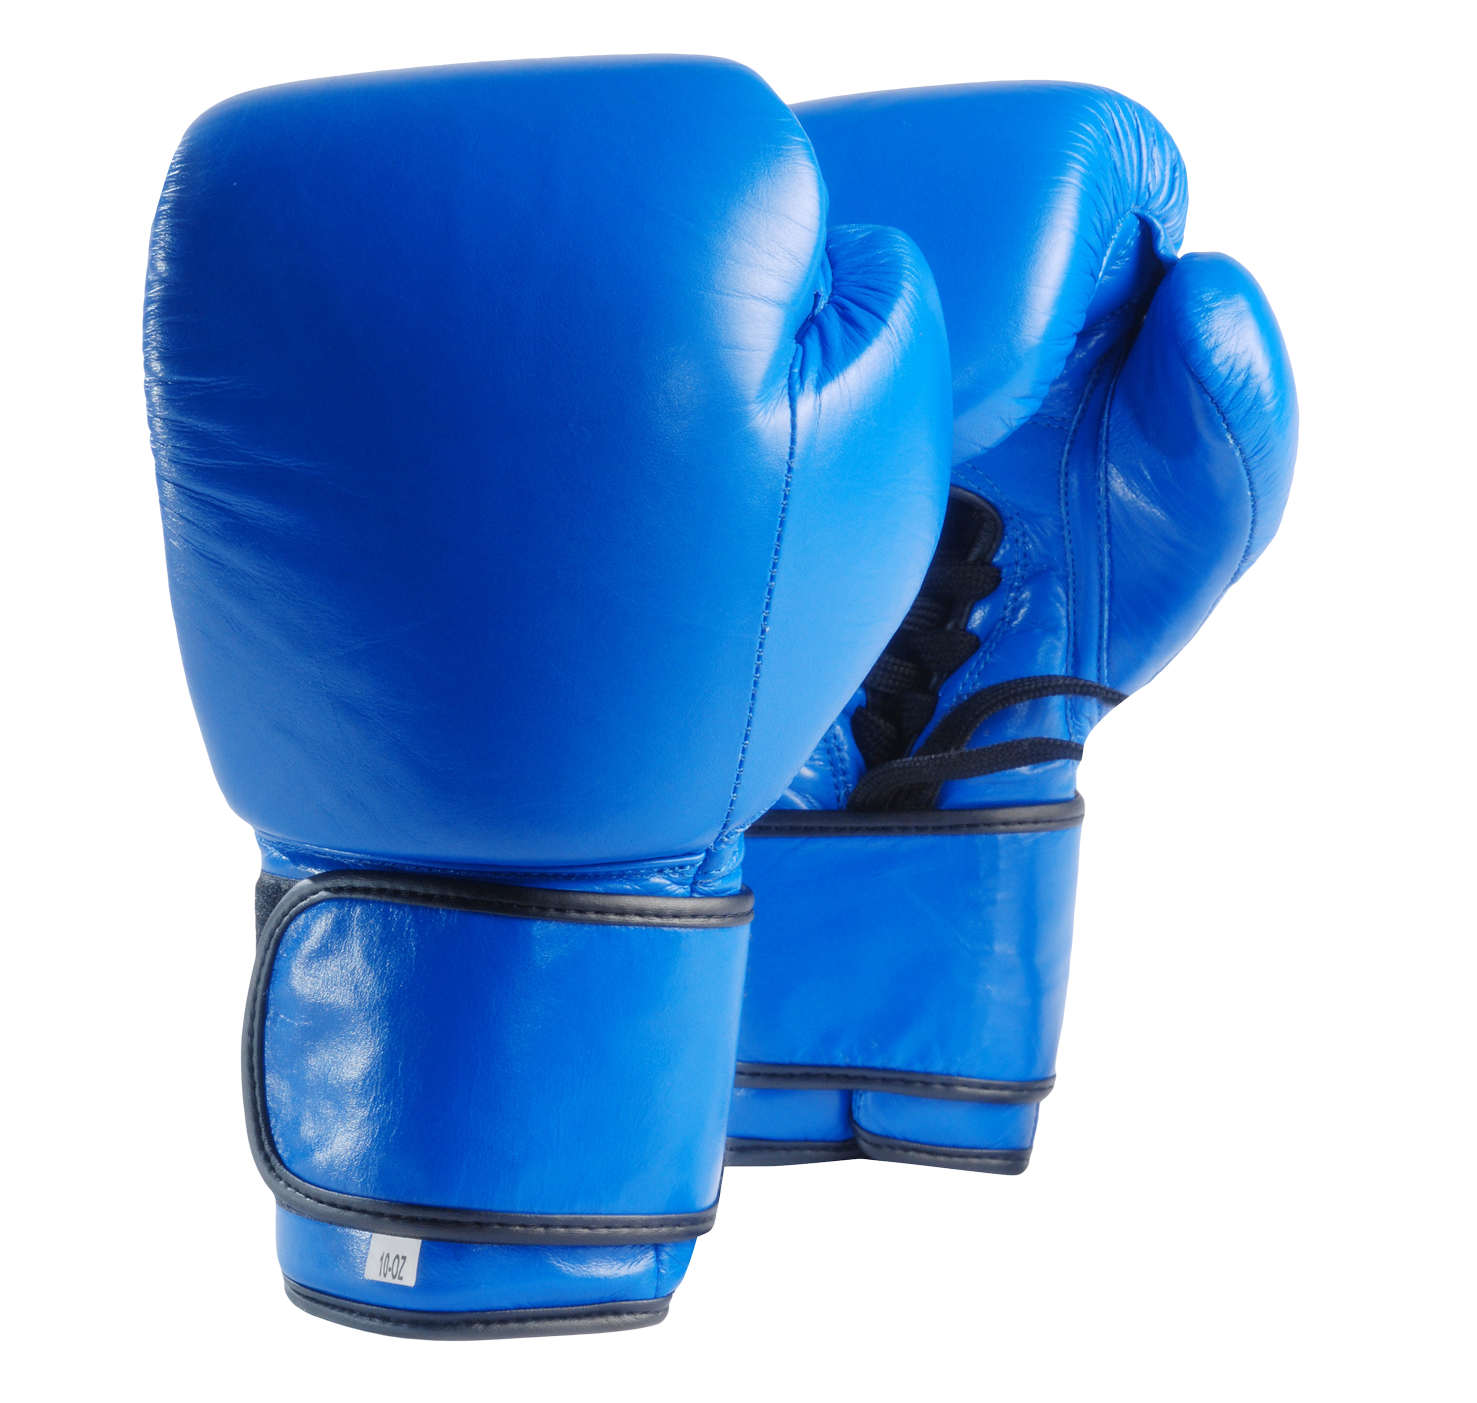 A Pair Of Blue Boxing Gloves